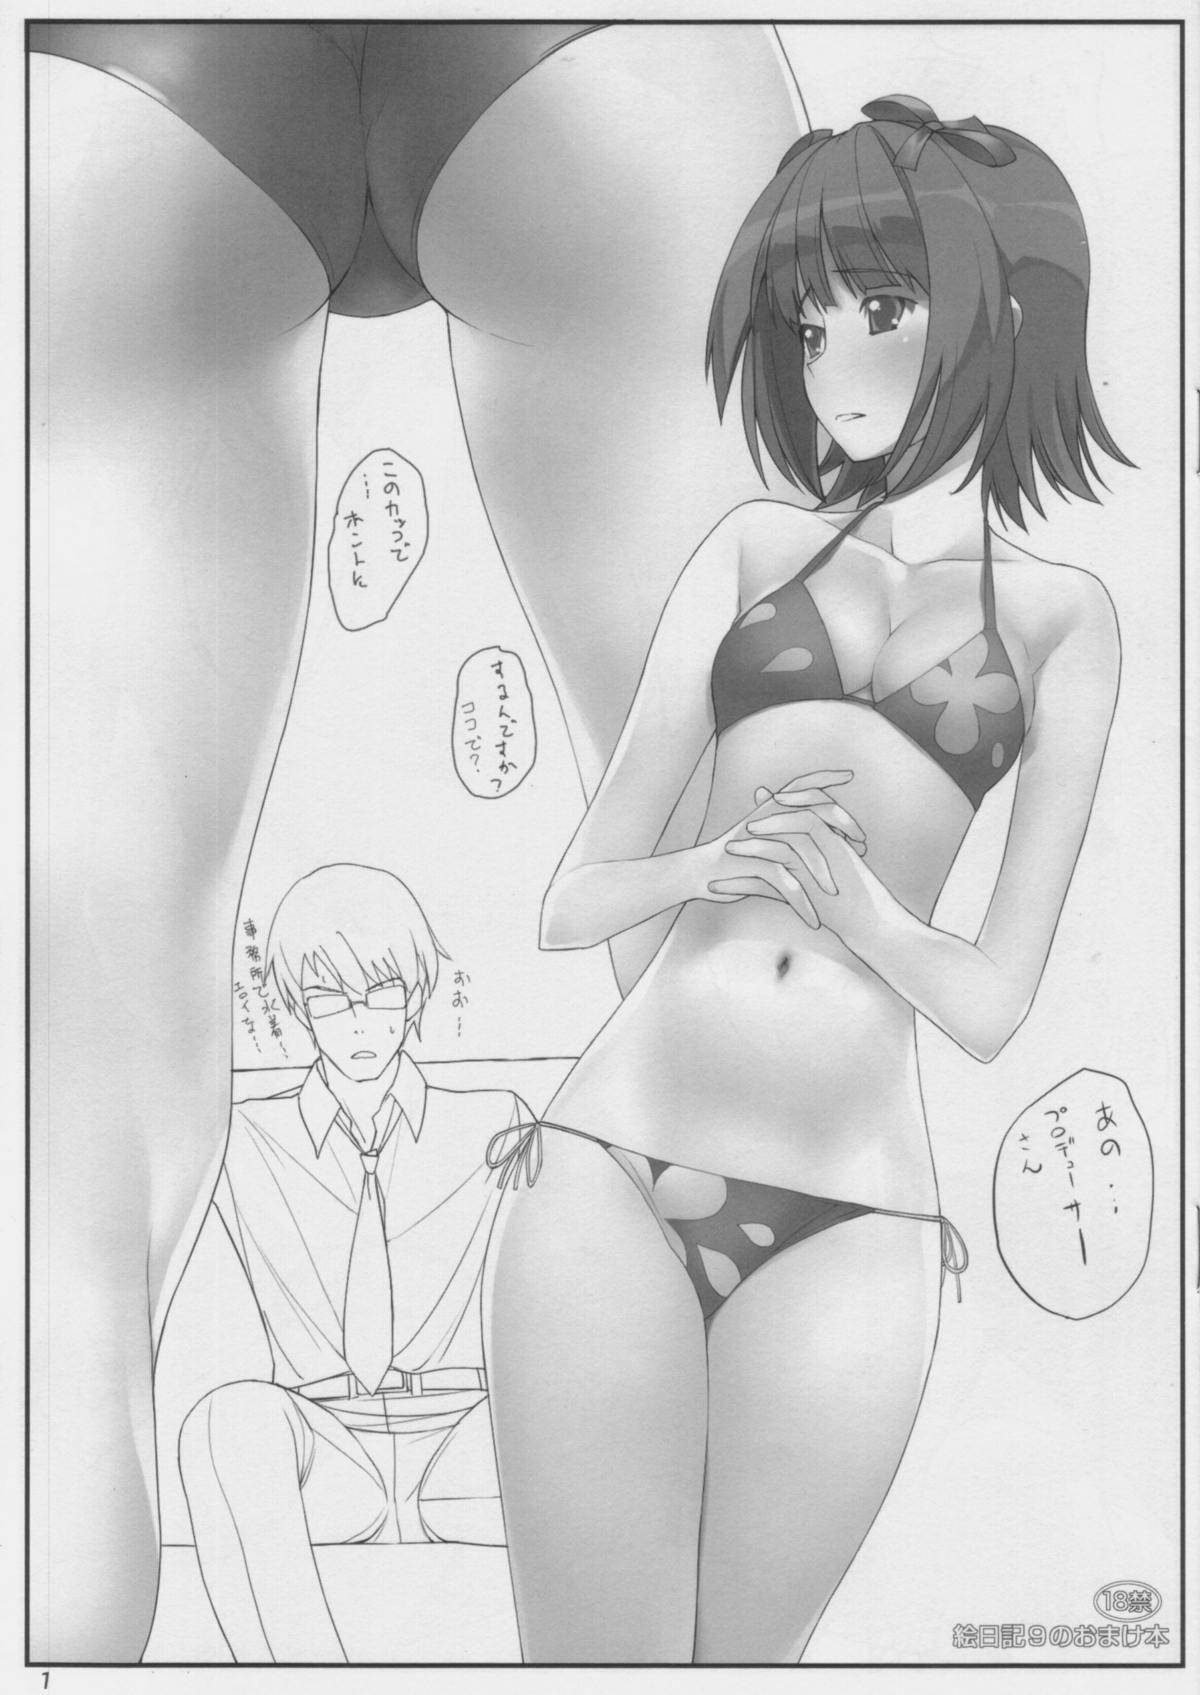 Pawg Enikki Recycle 9 no Omake Hon - The idolmaster Gundam 00 Hot Blow Jobs - Page 1